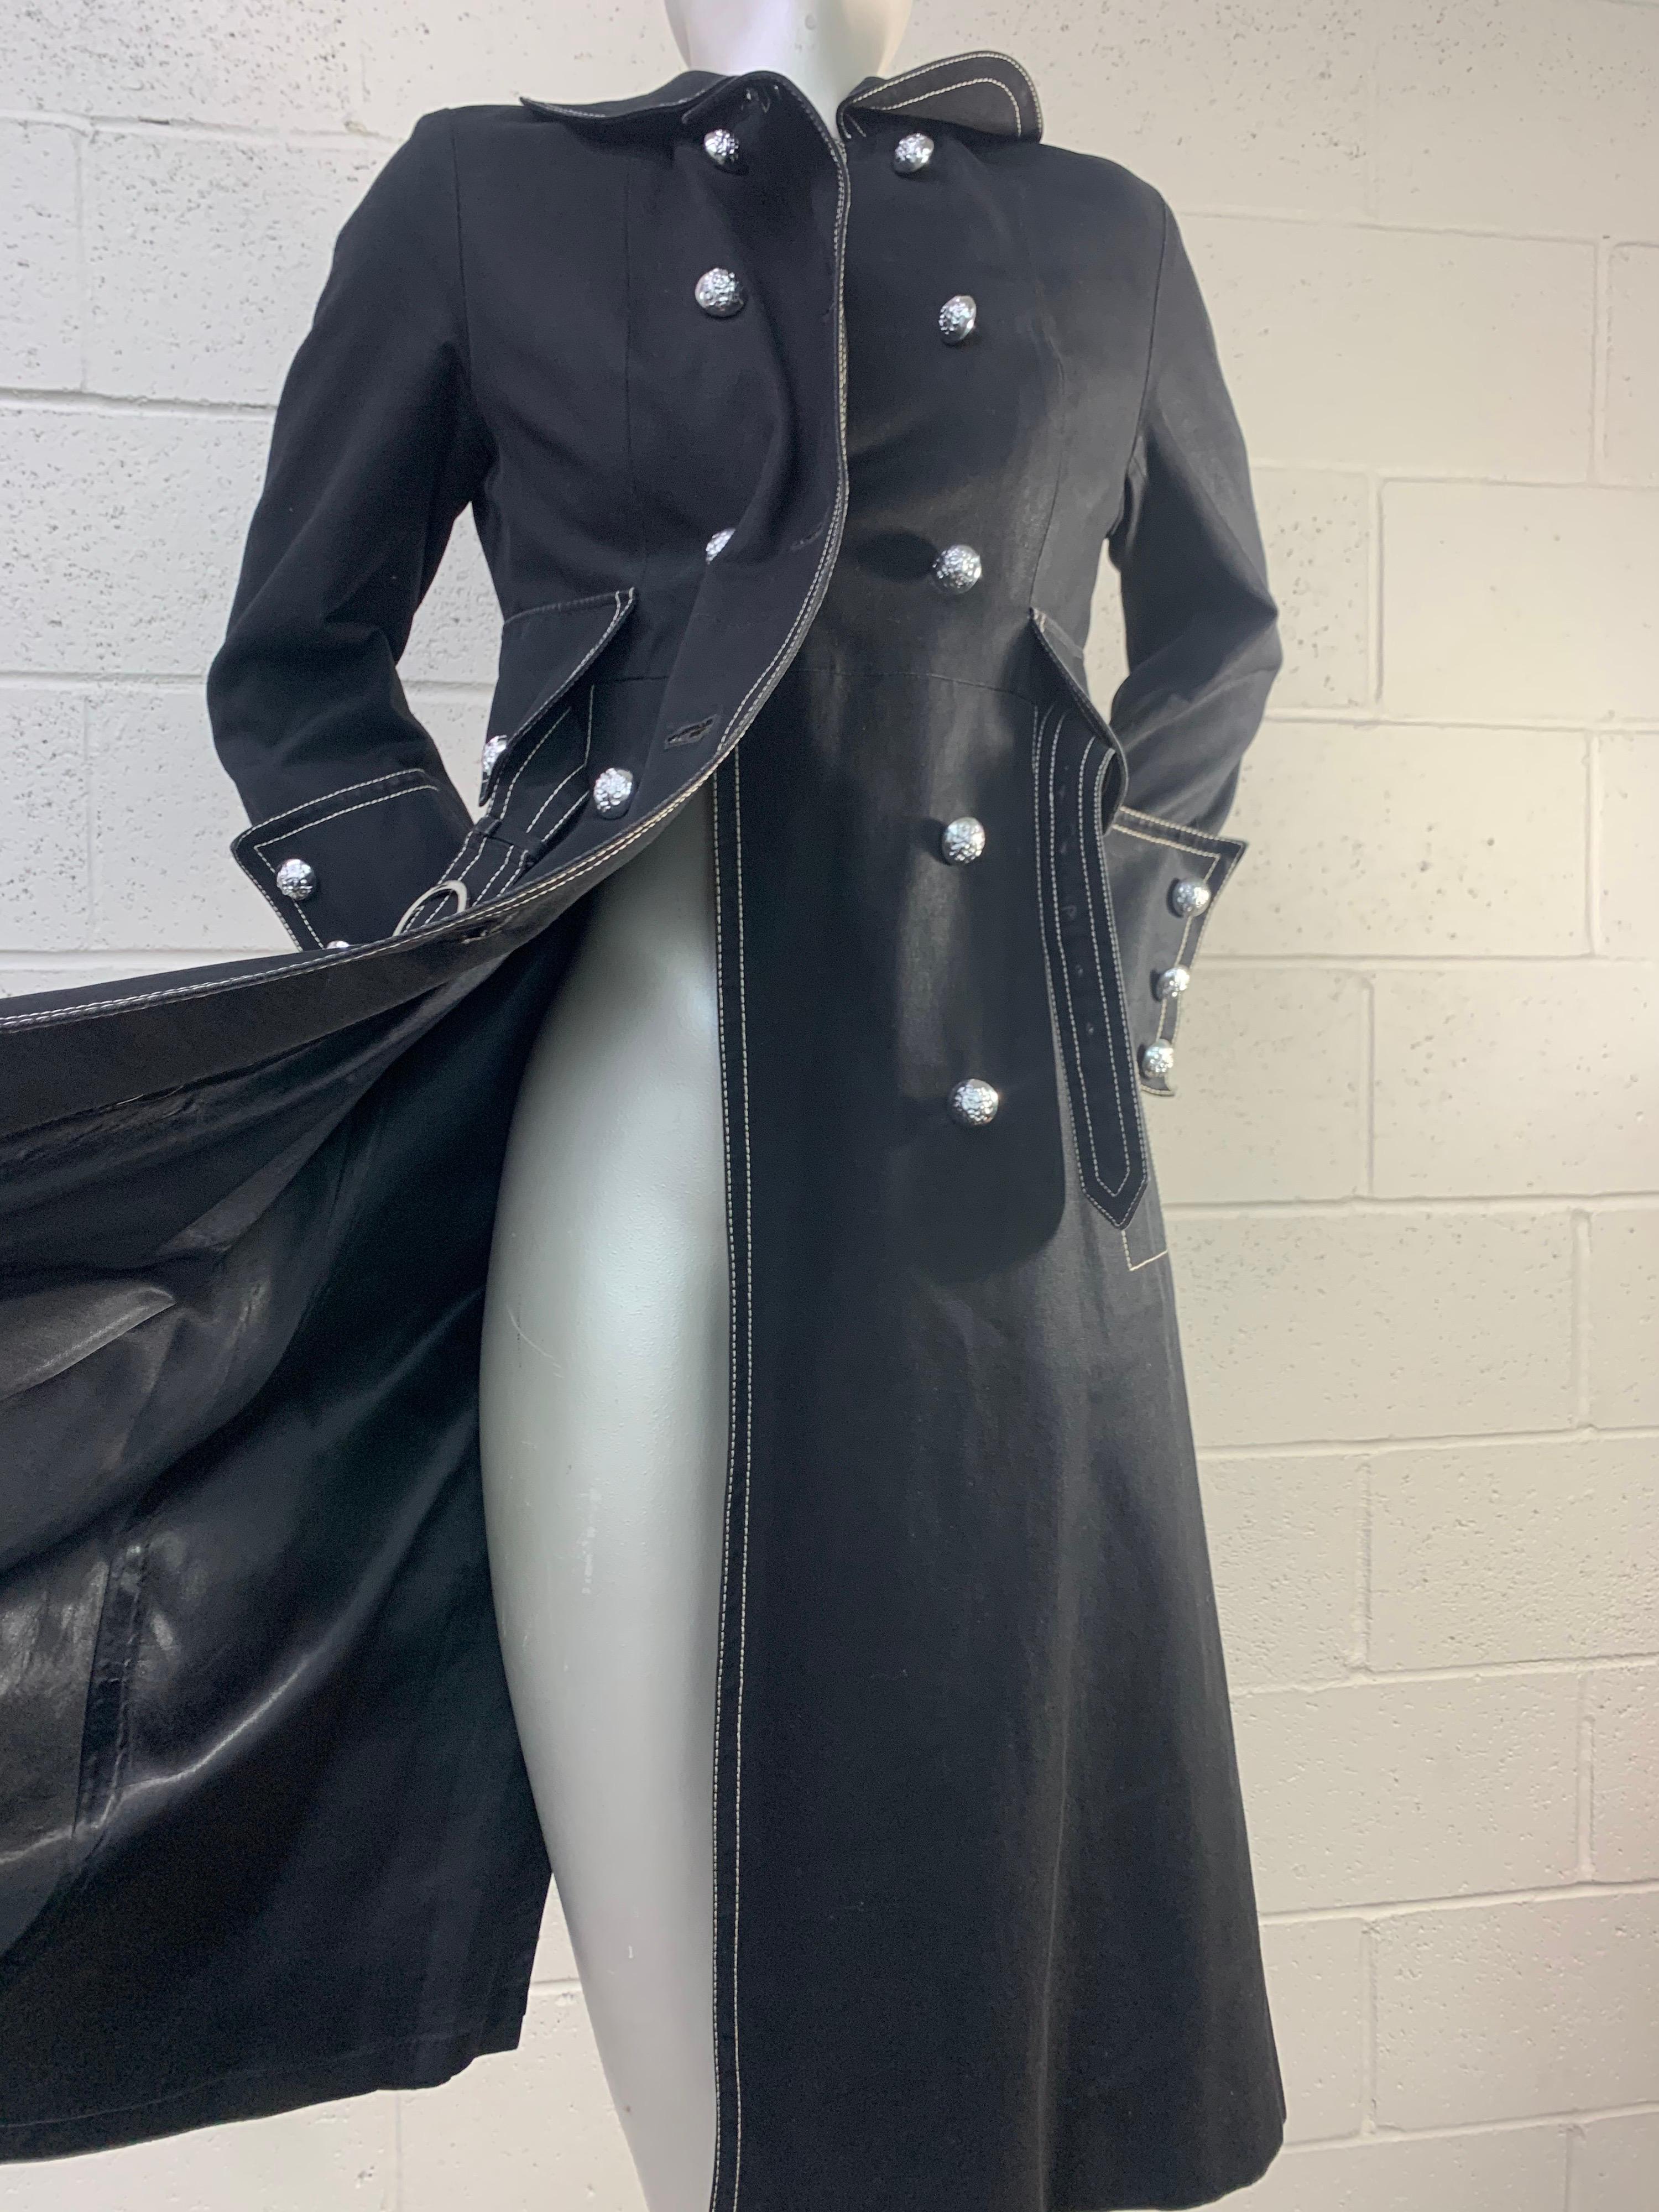 1960 Black Canvas Belted Trenchcoat w/ White Topstitching & Insignia Buttons For Sale 4